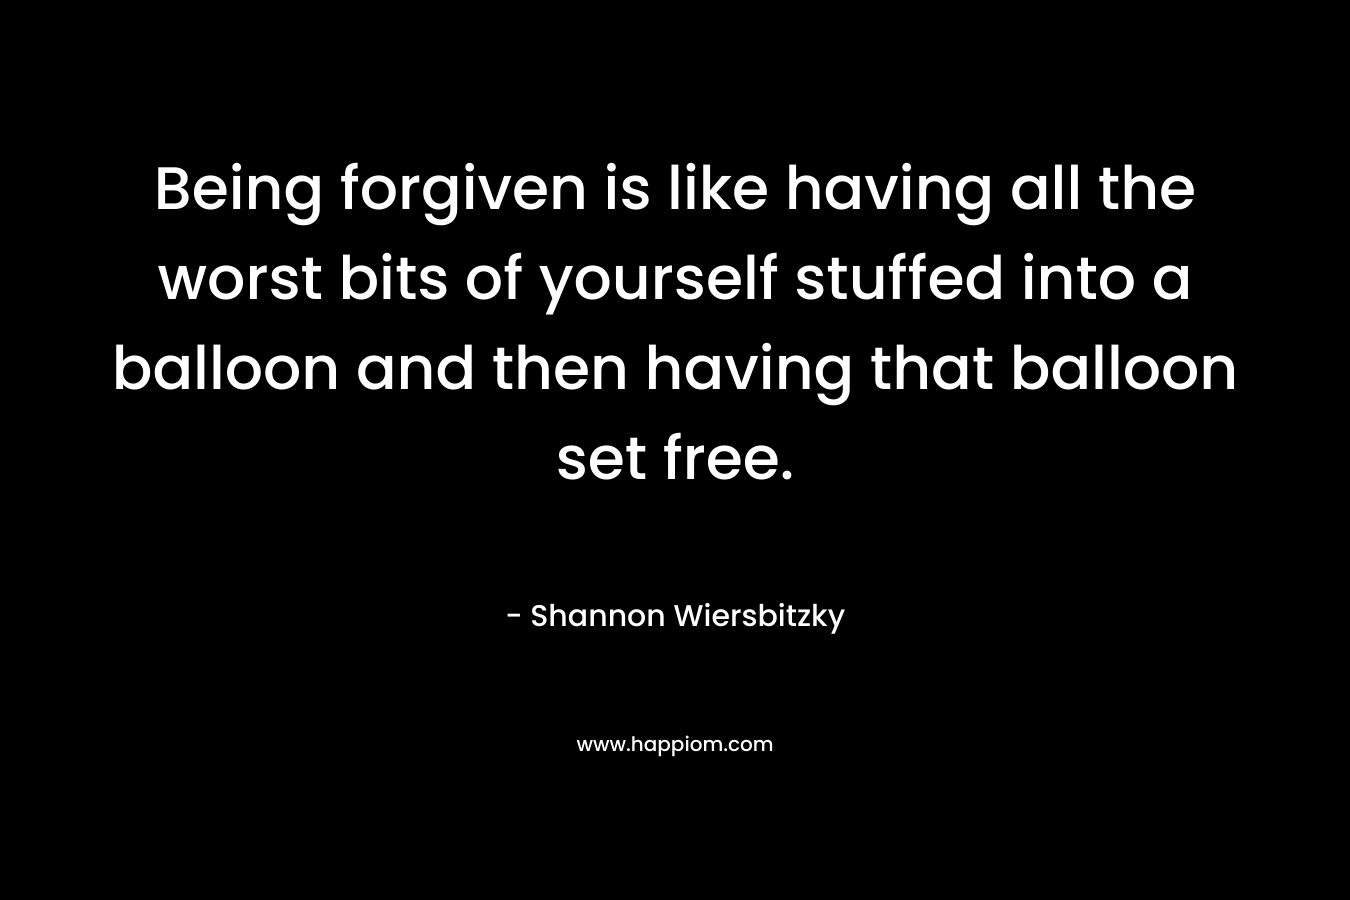 Being forgiven is like having all the worst bits of yourself stuffed into a balloon and then having that balloon set free. – Shannon Wiersbitzky